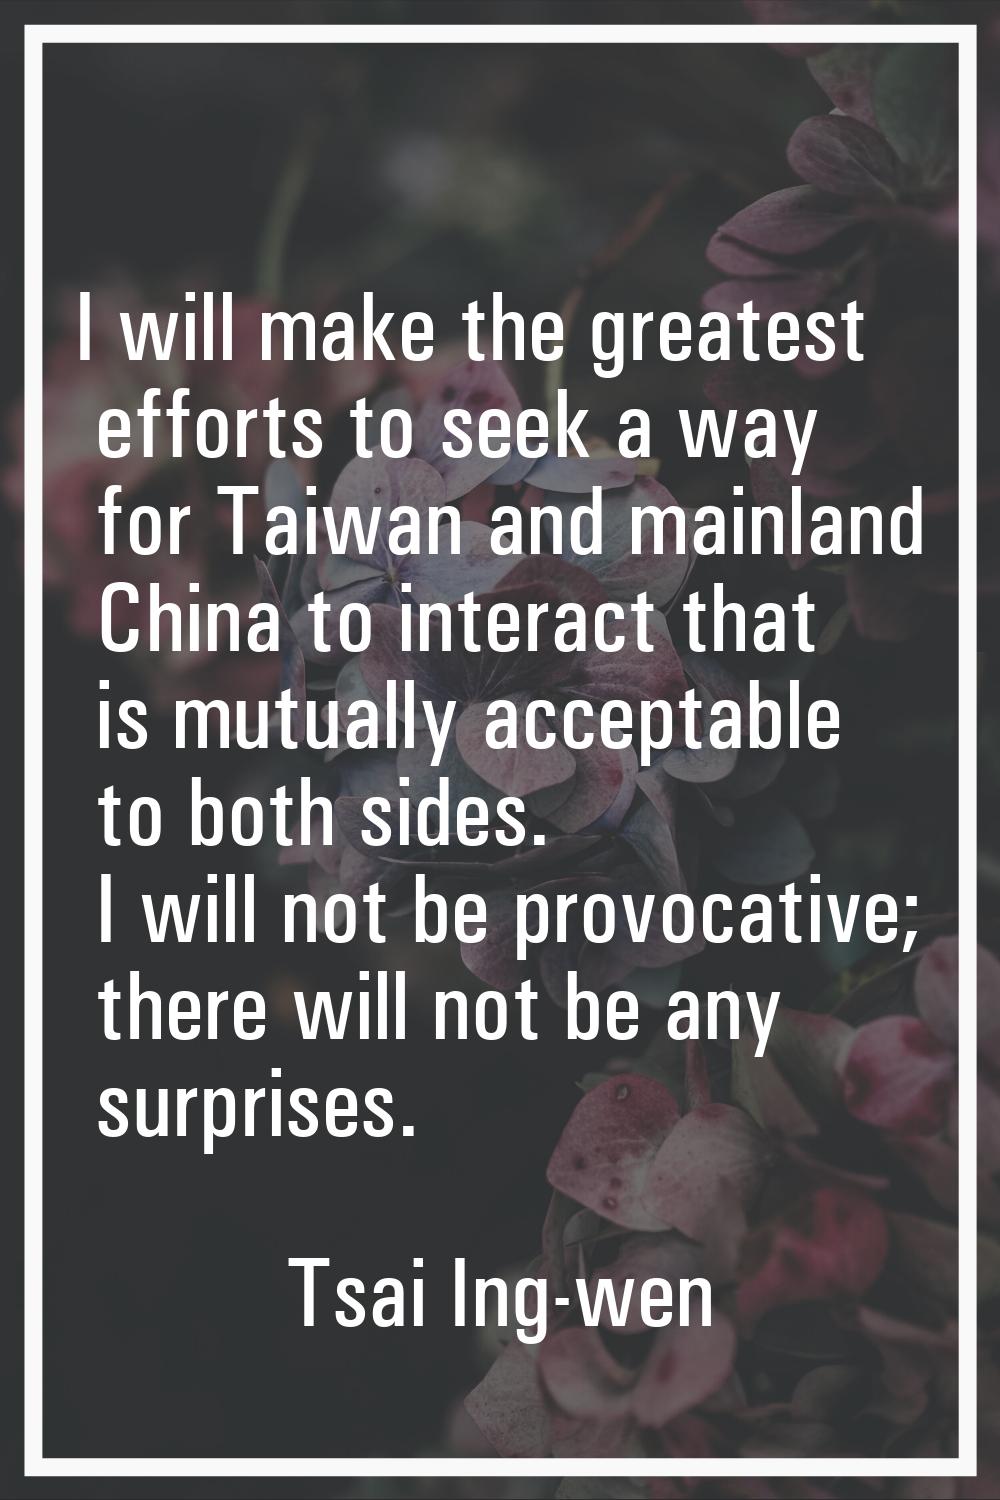 I will make the greatest efforts to seek a way for Taiwan and mainland China to interact that is mu